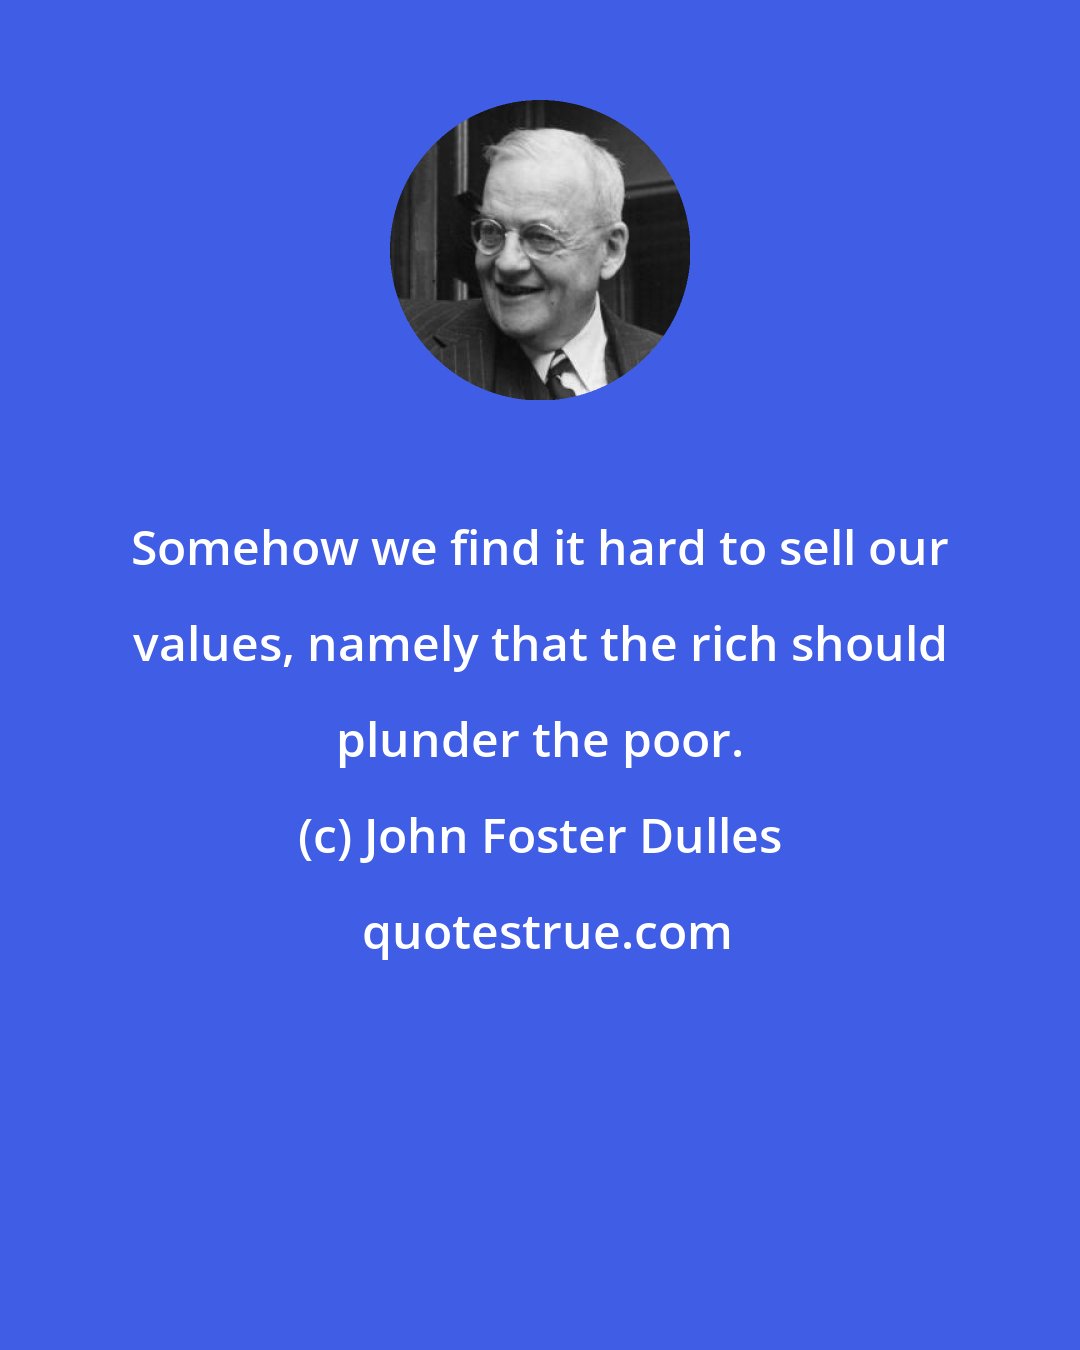 John Foster Dulles: Somehow we find it hard to sell our values, namely that the rich should plunder the poor.